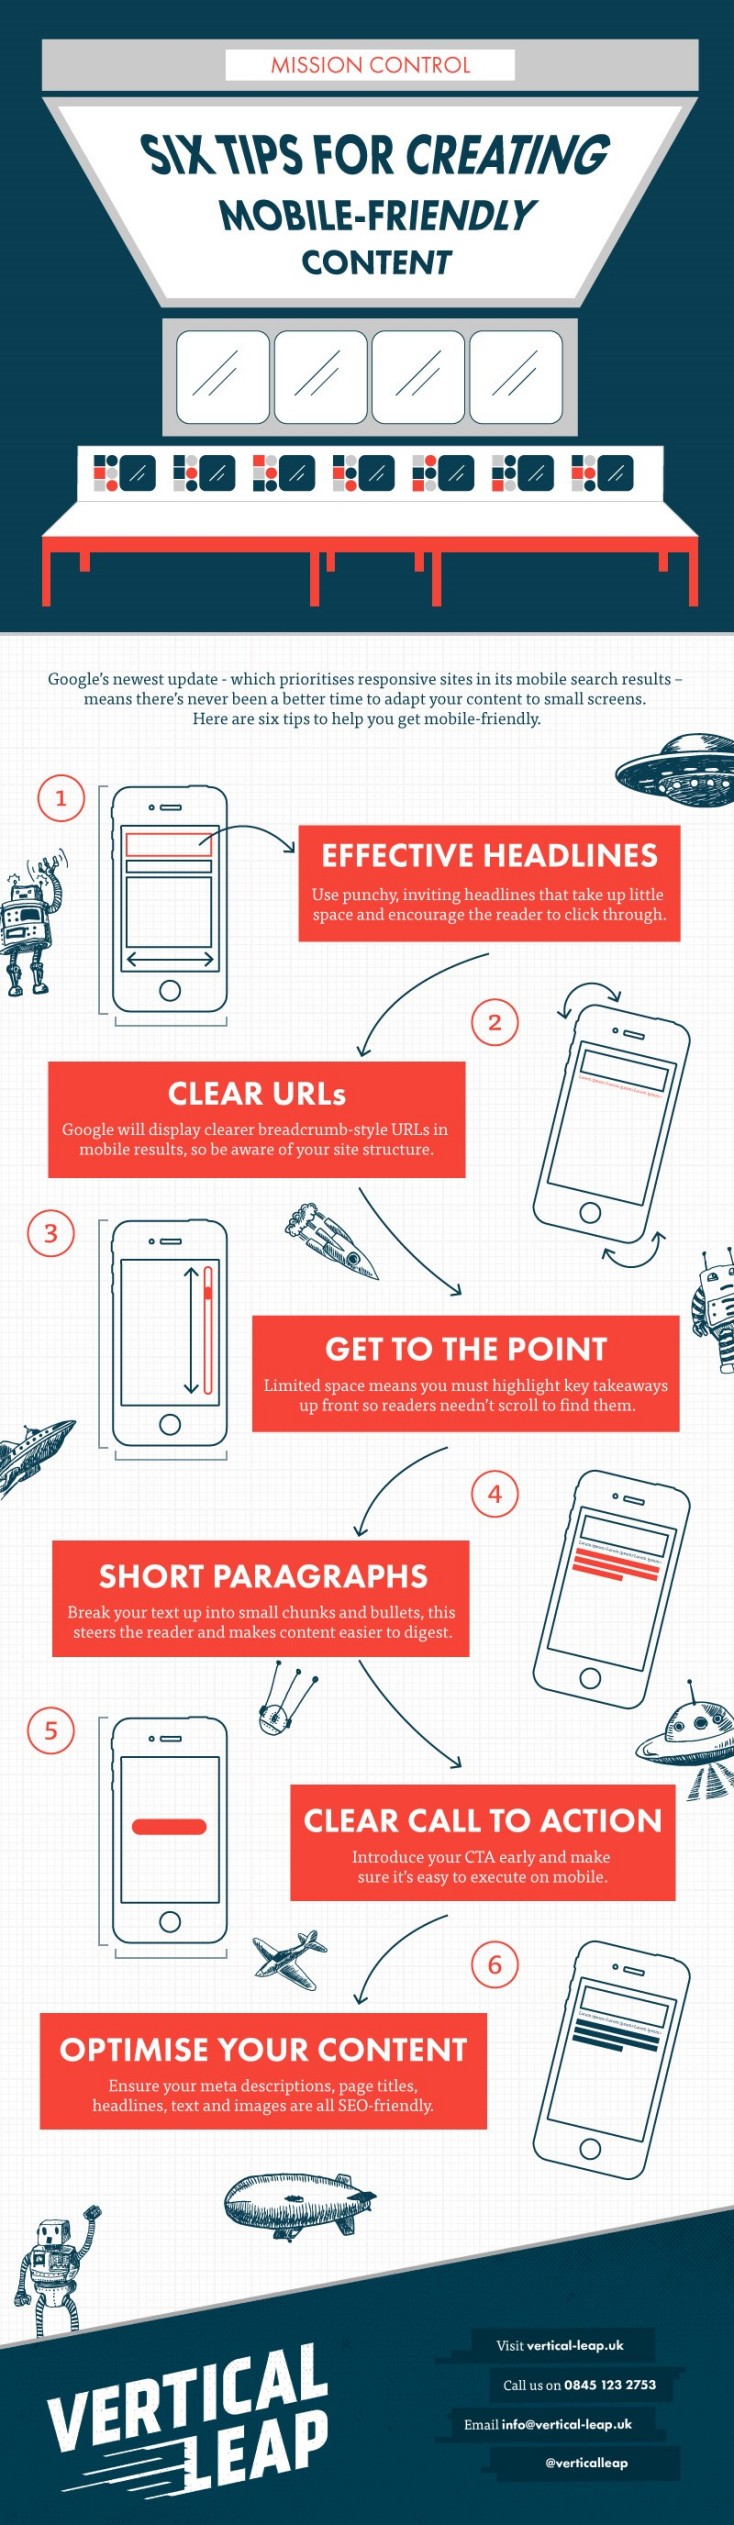 Six tips for creating mobile friendly content